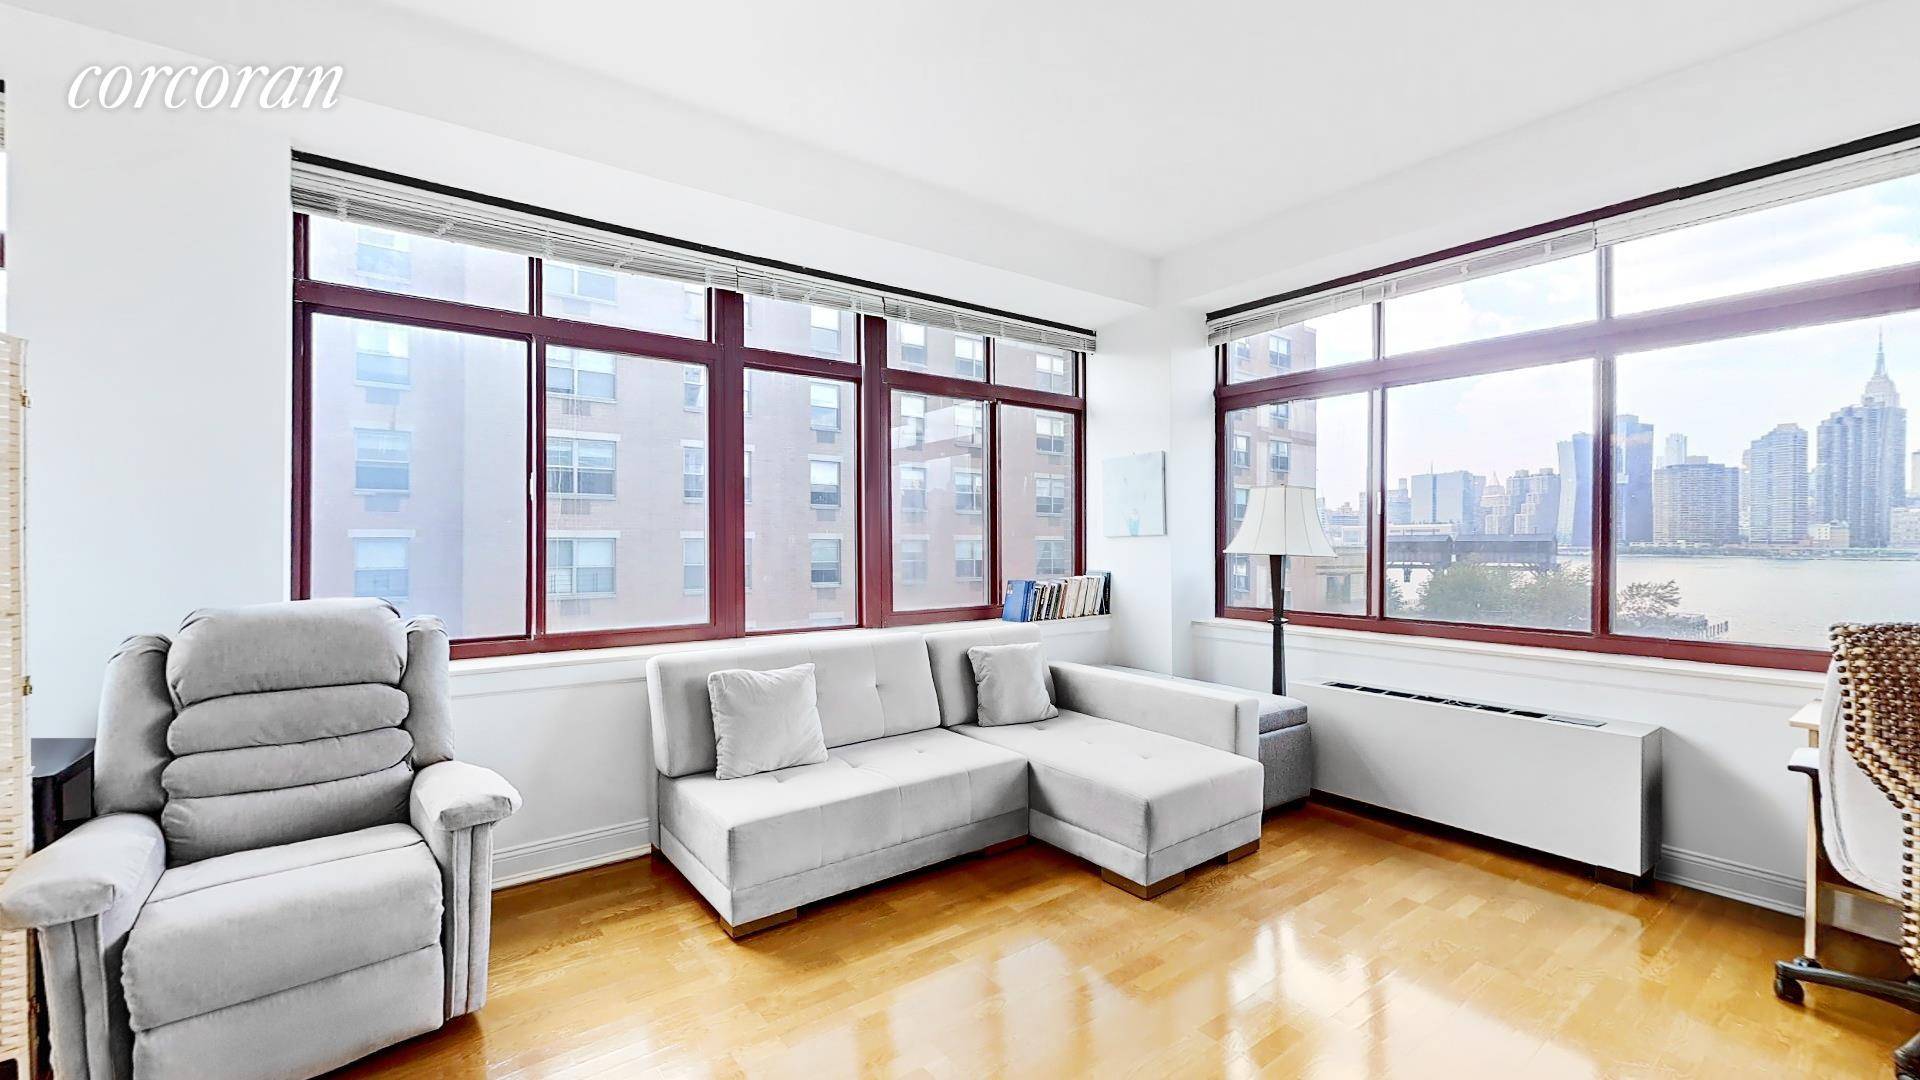 Oversized bright and sunny studio with unobstructed views of the Manhattan skyline and Gantry State Park.